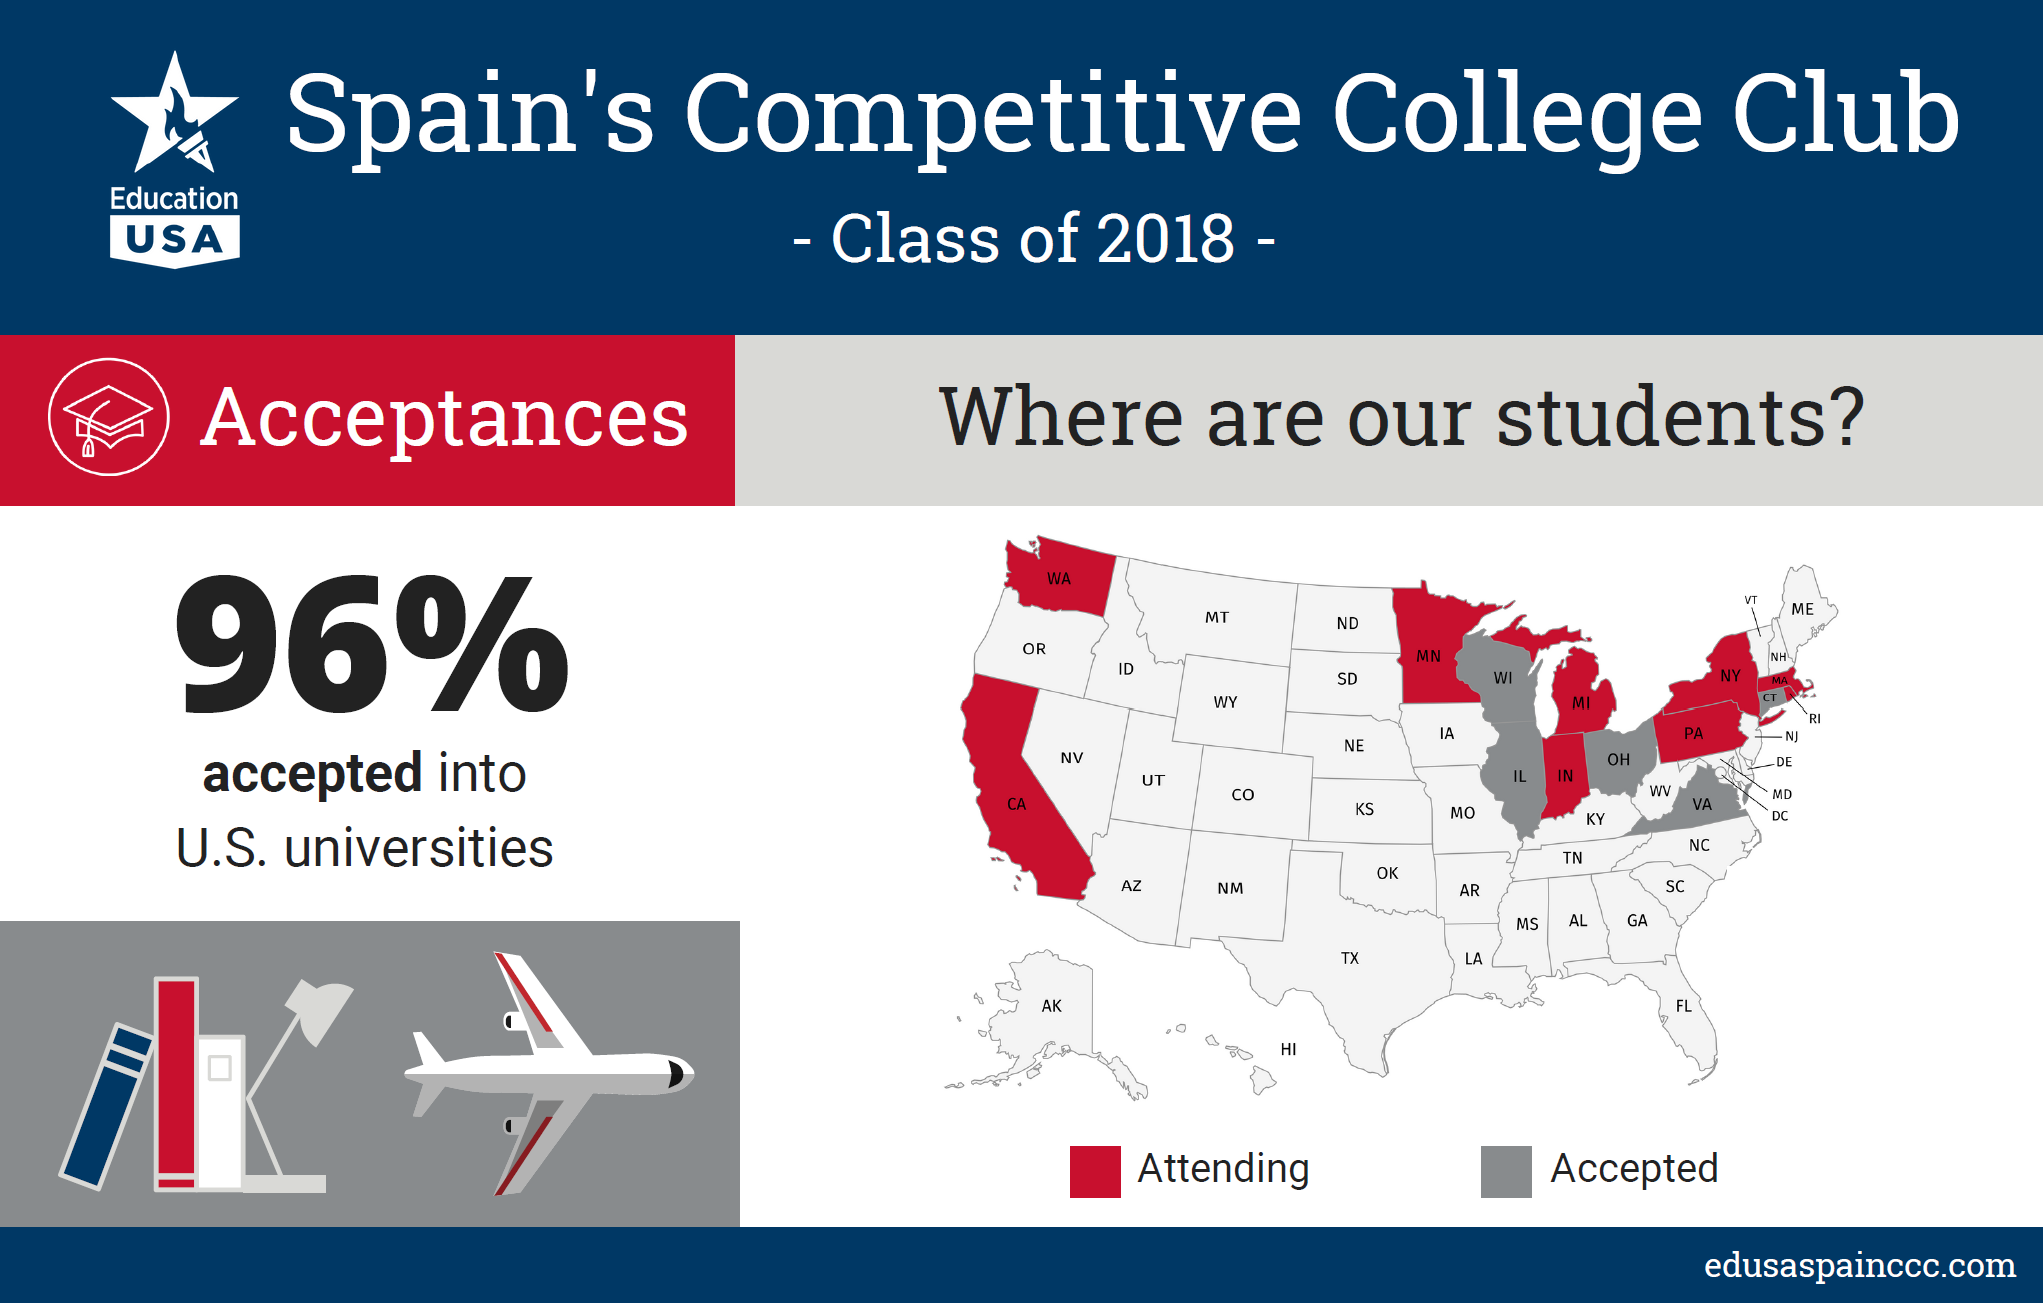 Admissions 2018: CCC Class of 2018 Results